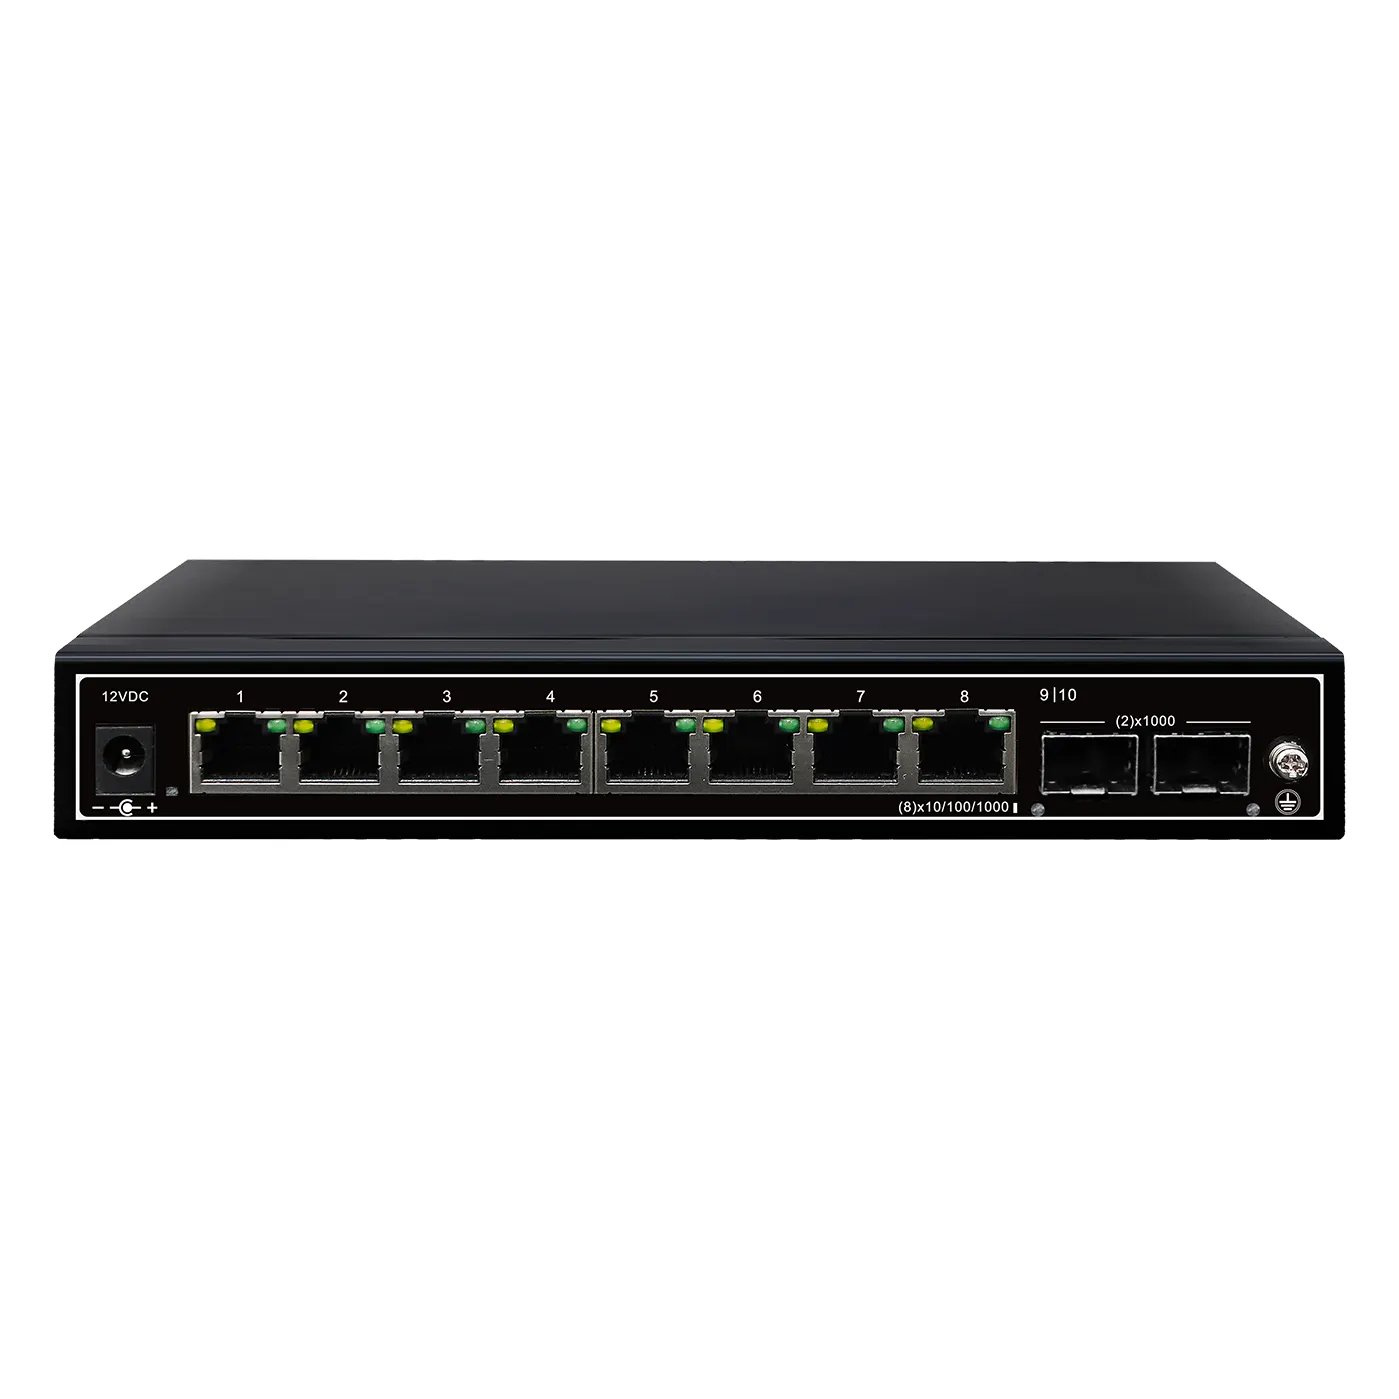 Plug And Play 20G Ethernet Switch Unmanaged Network Switch With 10-100-1000Mbps Devices Unmanaged Network Switch